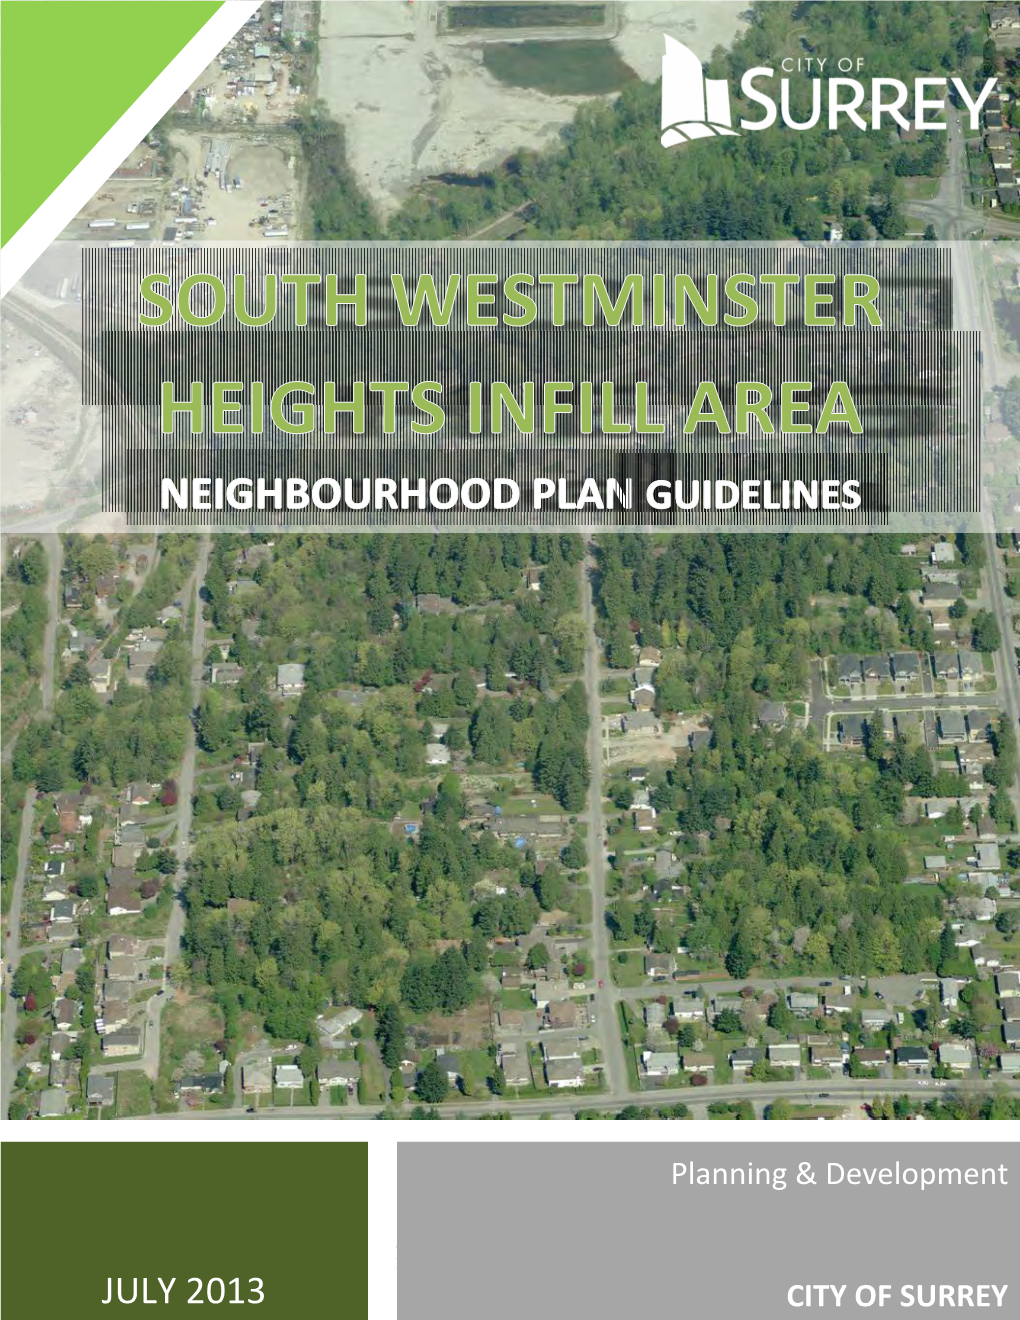 South Westminster Heights Infill Area Neighbourhood Plan Guidelines